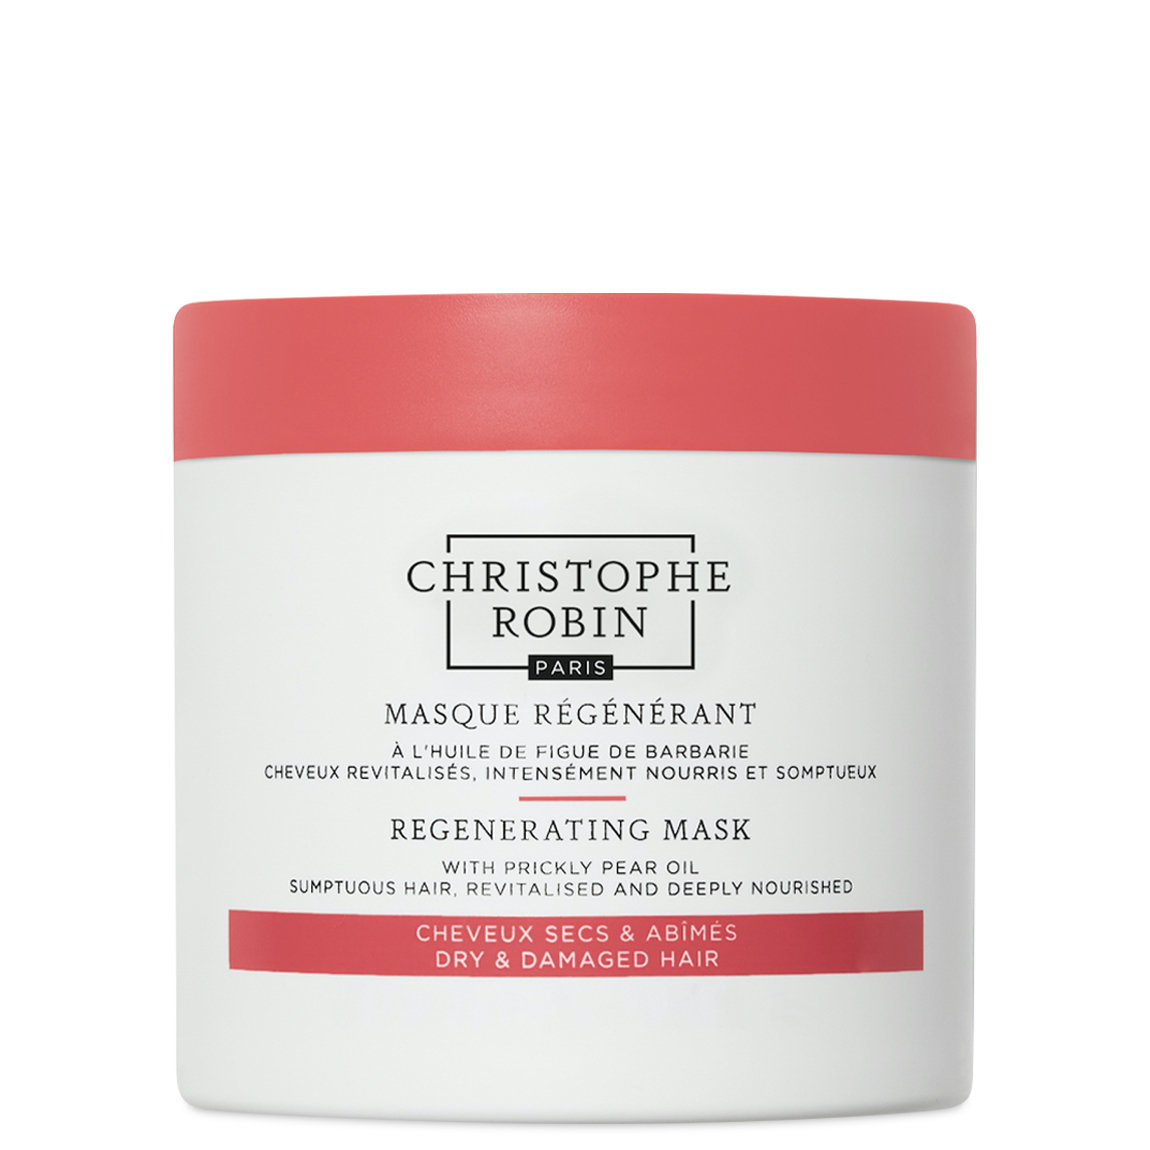 Christophe Robin Regenerating Mask with Rare Prickly Pear Oil alternative view 1 - product swatch.